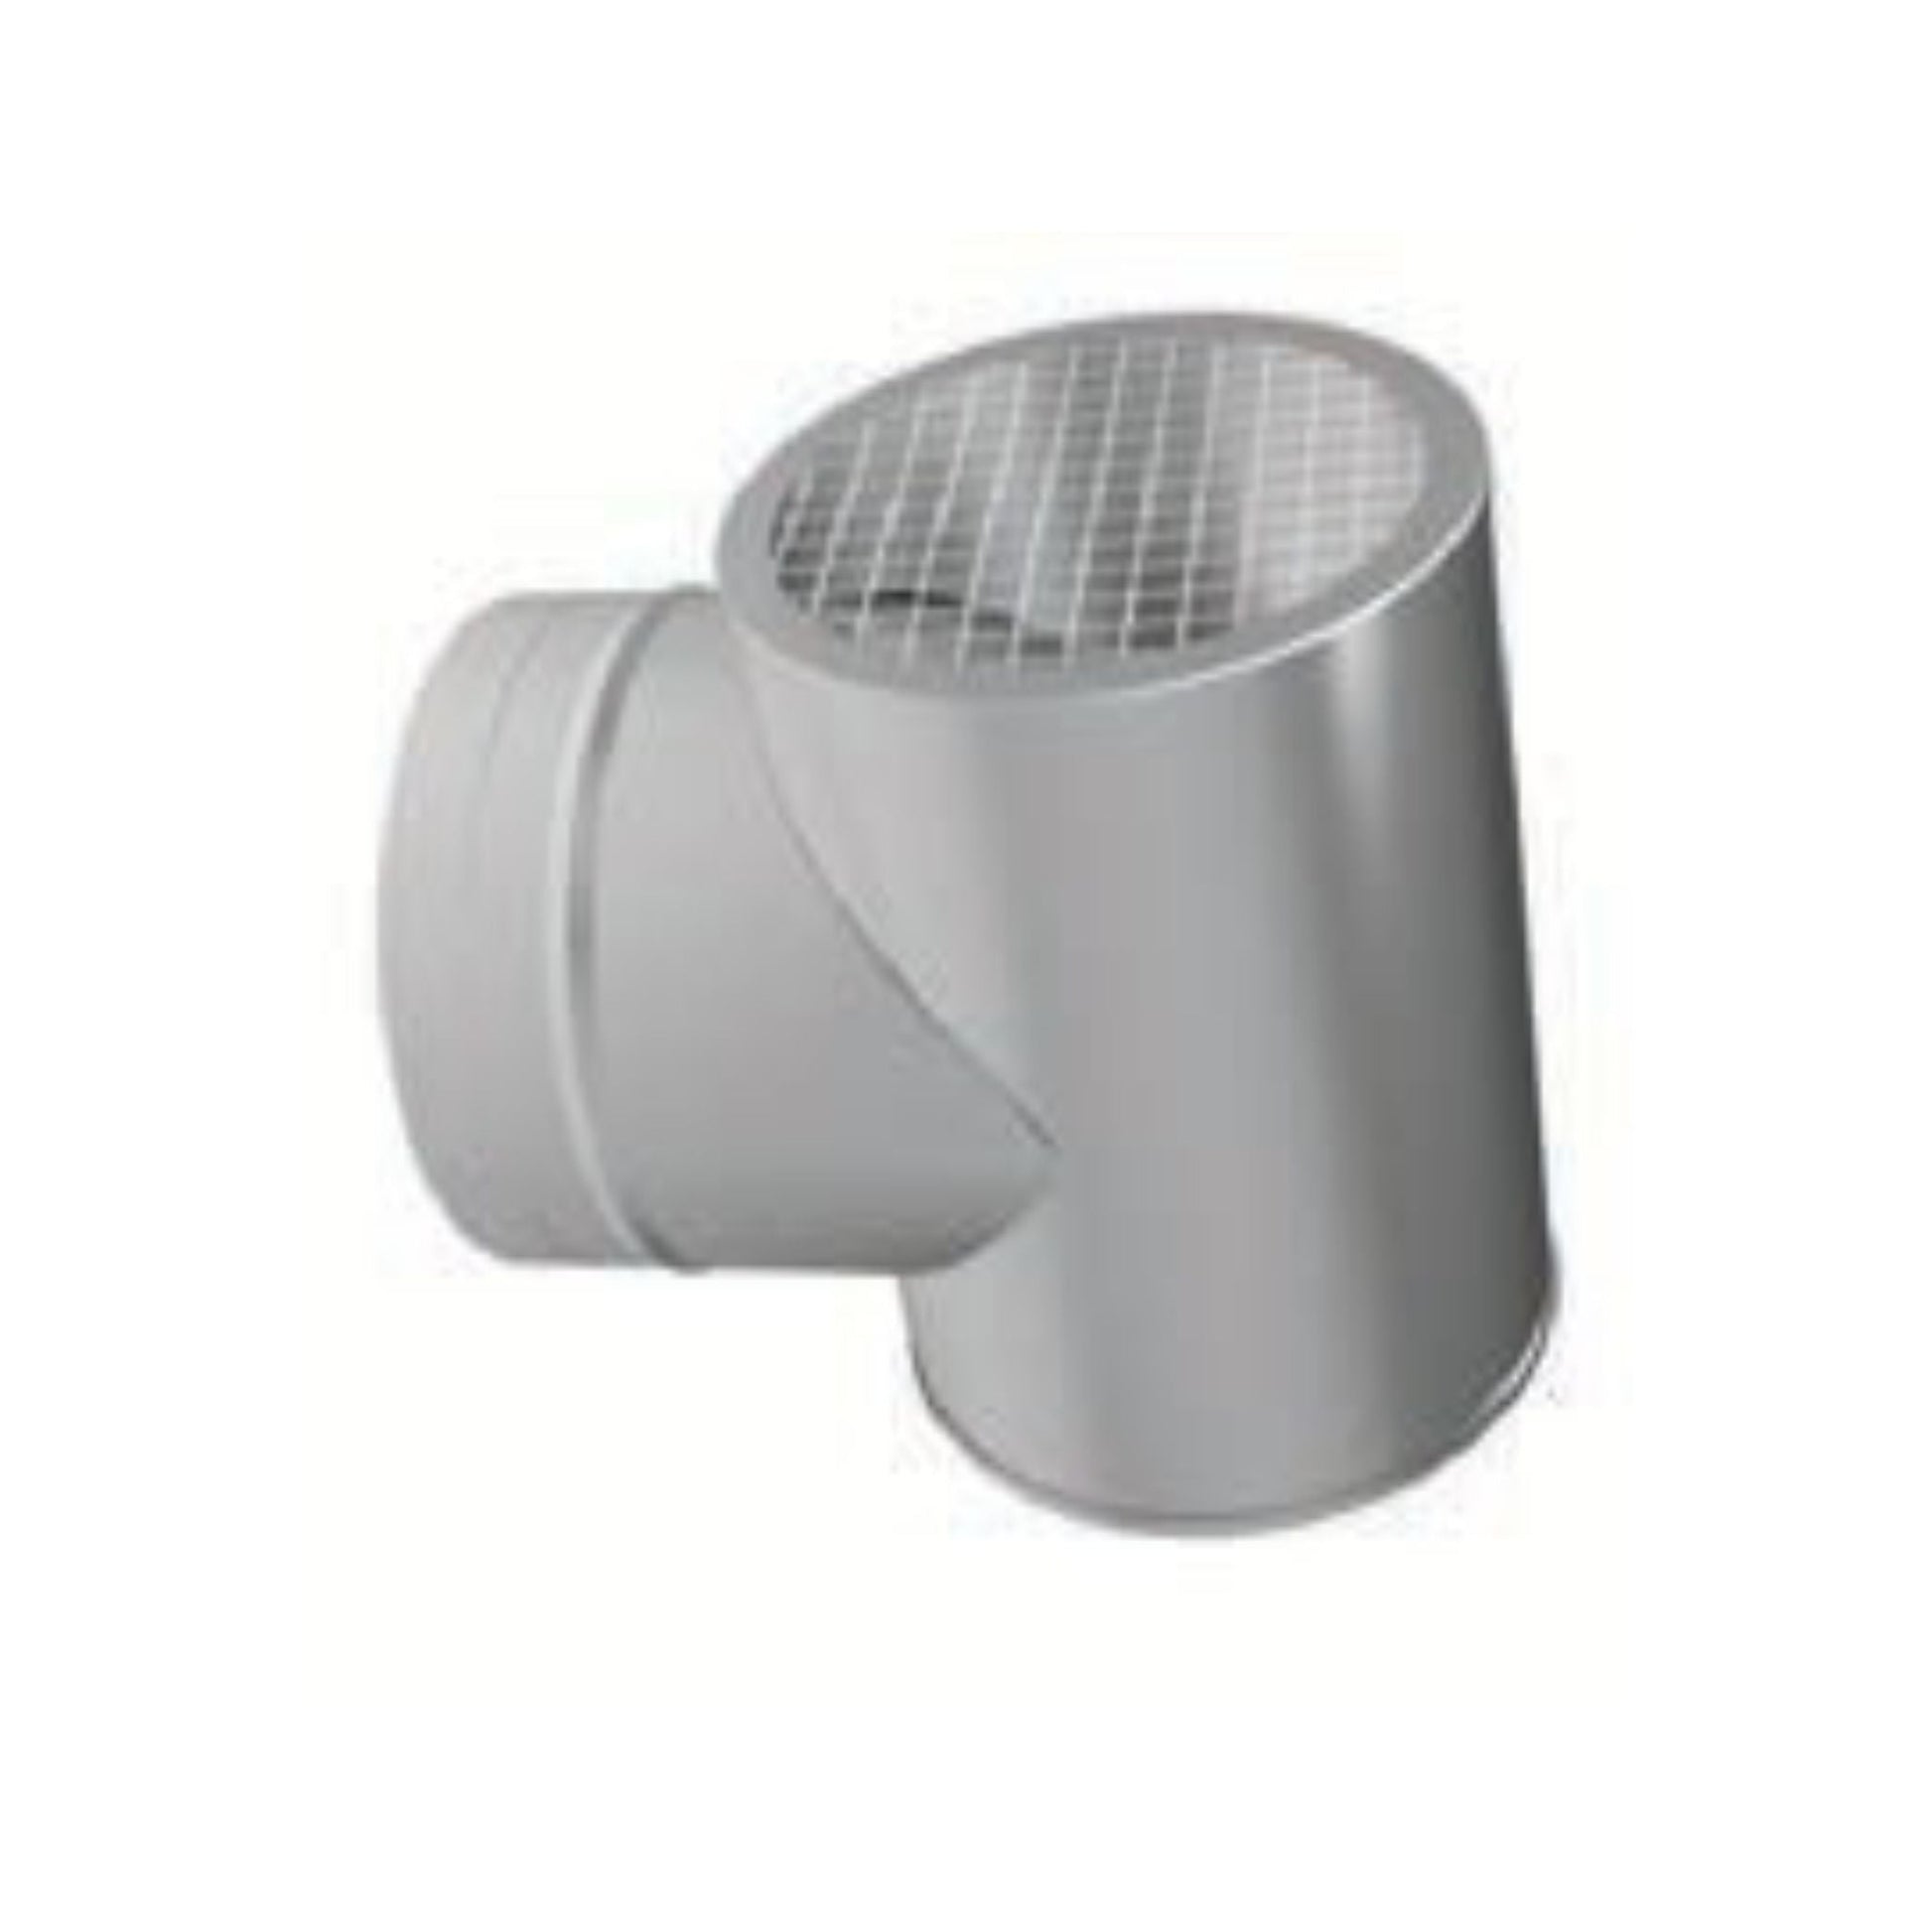 DuraVent FasNSeal 10" 29-4C Stainless Steel Termination Tee